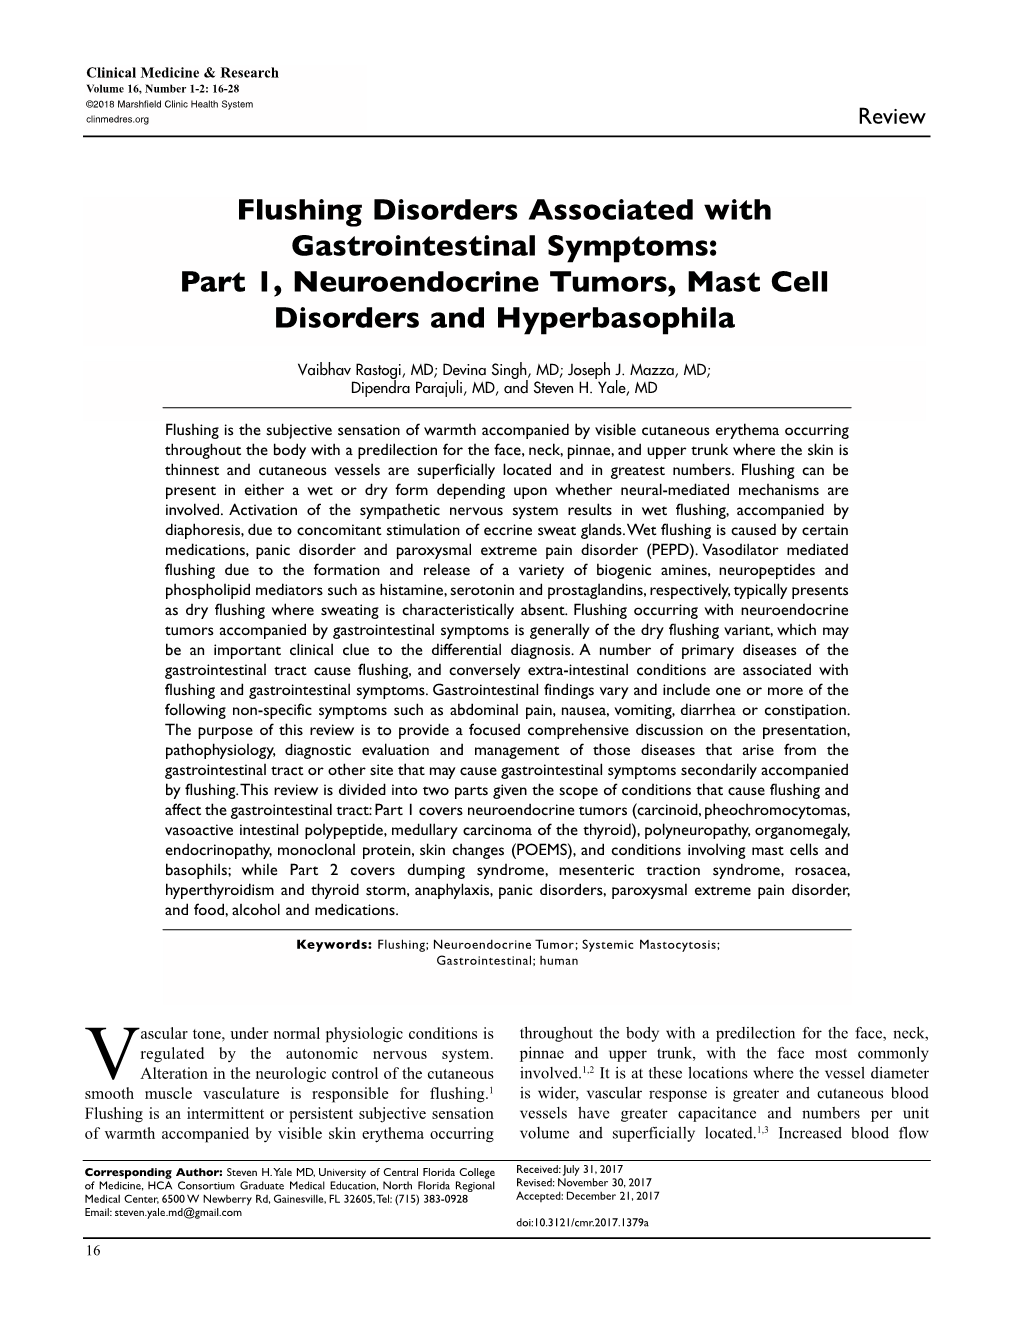 Flushing Disorders Associated with Gastrointestinal Symptoms: Part 1, Neuroendocrine Tumors, Mast Cell Disorders and Hyperbasophila